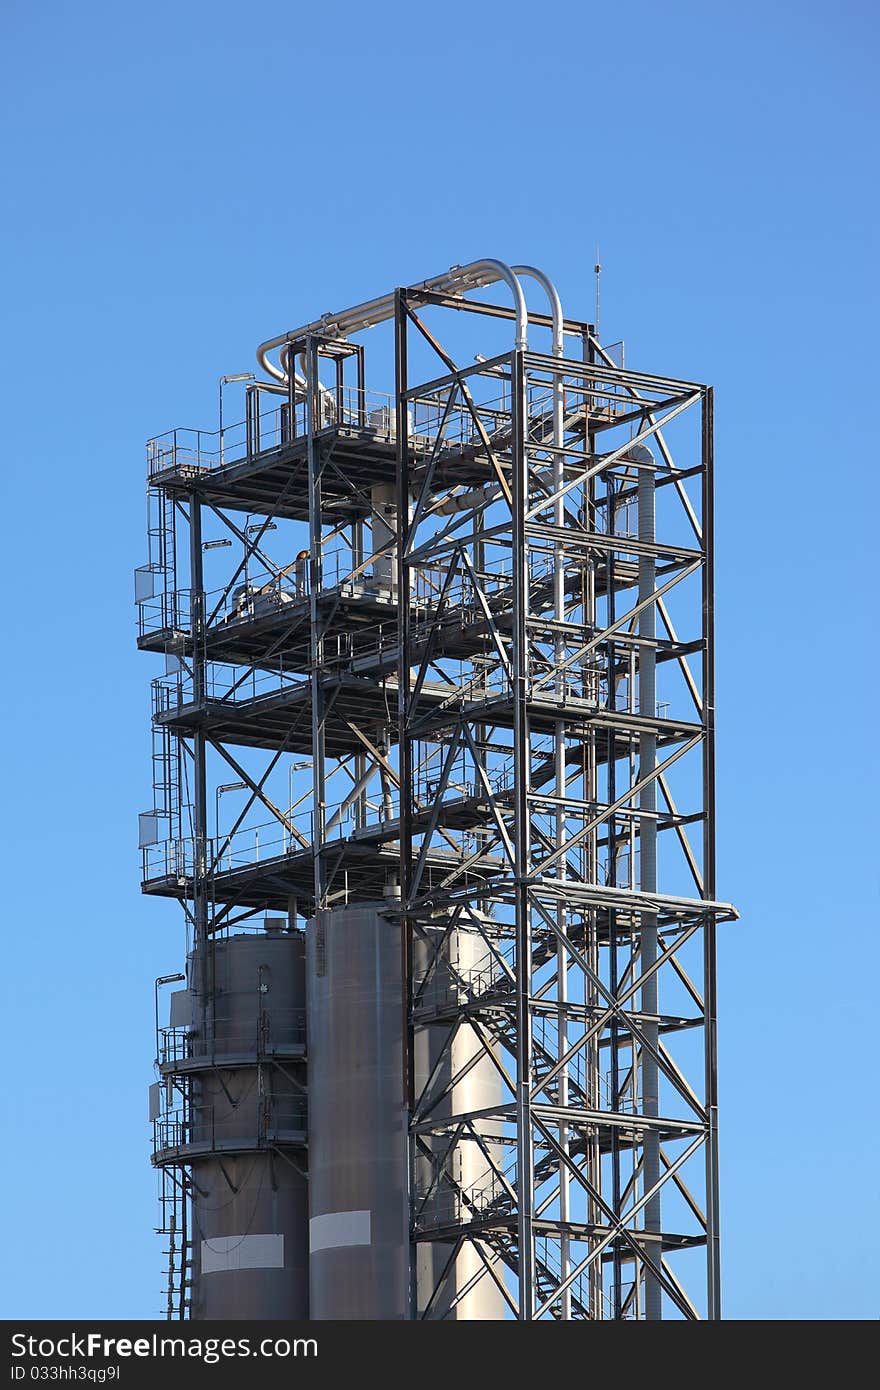 Tower structure in an oil refinery over blue sky. Tower structure in an oil refinery over blue sky